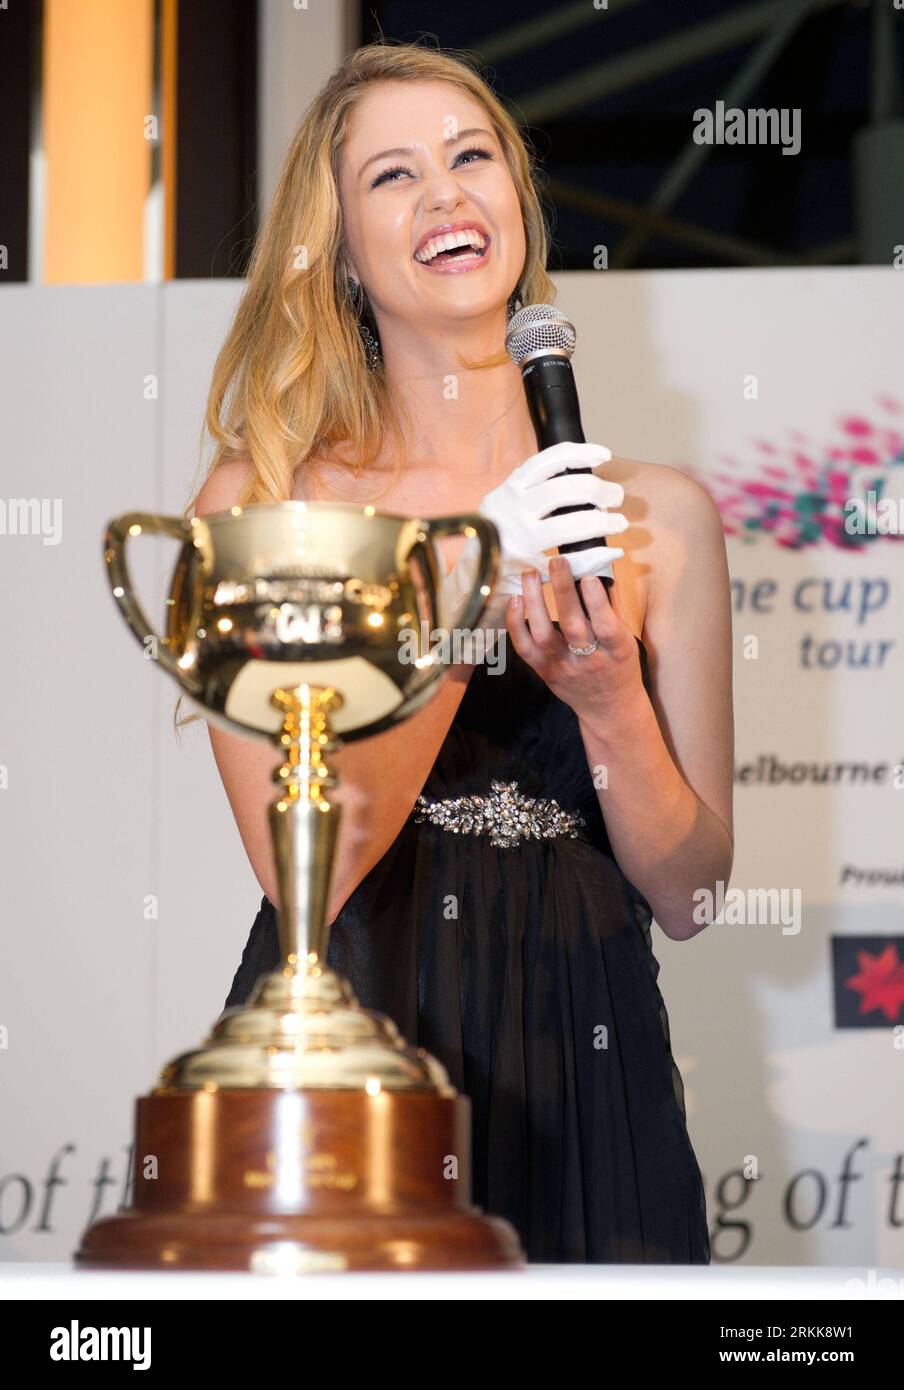 Bildnummer: 56211675  Datum: 24.10.2011  Copyright: imago/Xinhua (111024) -- MELBOURNE, Oct. 24, 2011 (Xinhua) -- Miss Universe Scherri-Lee Biggs of Australia presents the 2011 Emirates Melbourne Cup trophy during the homecoming ceremony at the Sofitel in Melbourne, Australia, on Oct. 24, 2011. (Xinhua/Bai Xue)(cyl) AUSTRALIA-MELBOURNE-HORSE RACING-MELBOURNE CUP HOMECOMING CEREMONY PUBLICATIONxNOTxINxCHN People Entertainment x0x xst 2011 hoch      56211675 Date 24 10 2011 Copyright Imago XINHUA  Melbourne OCT 24 2011 XINHUA Miss Universe Scherri Lee Biggs of Australia Presents The 2011 Emirate Stock Photo